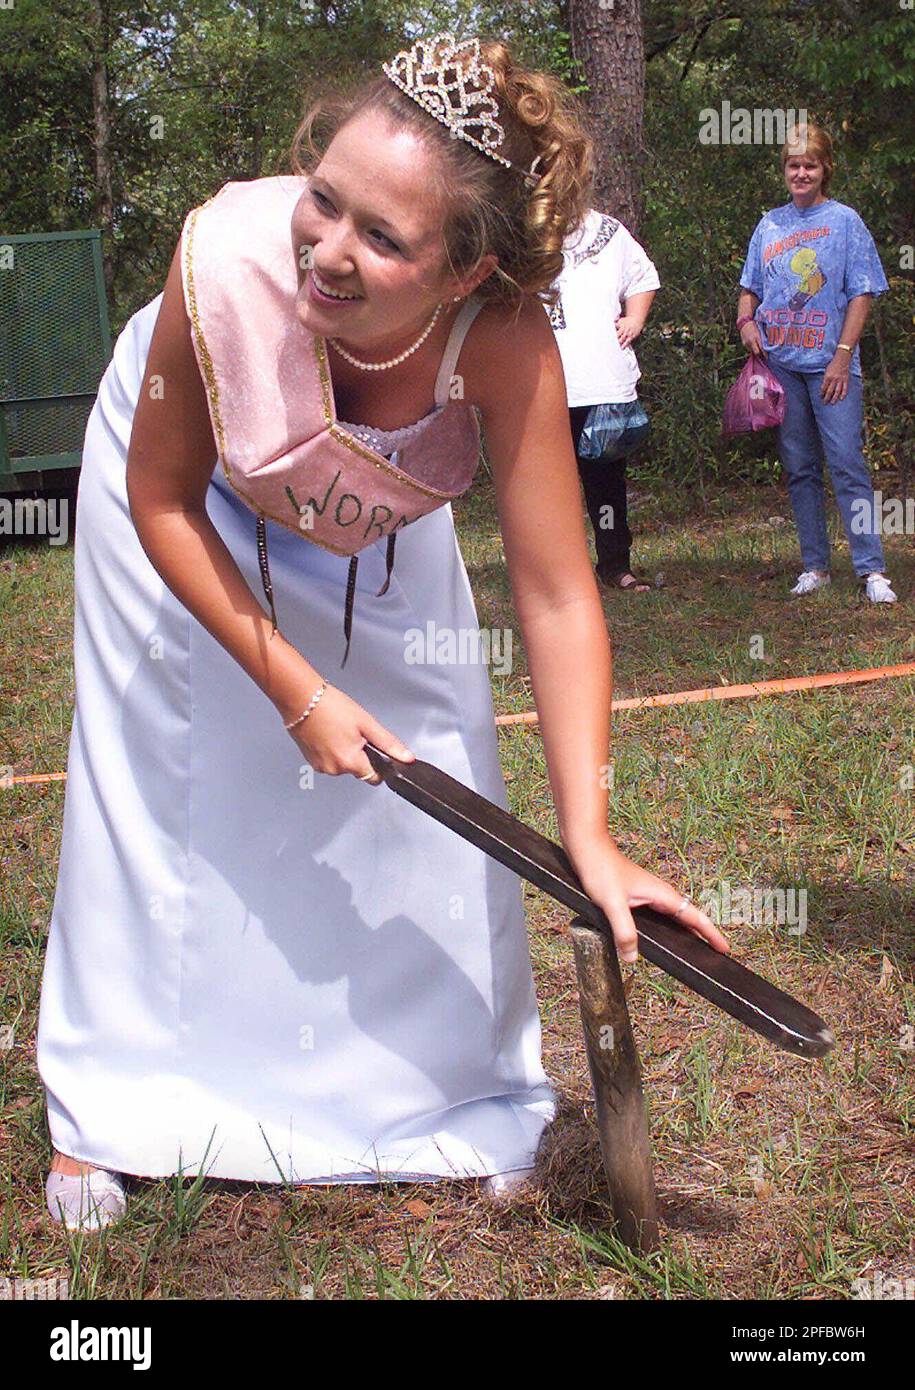 Worm grunting queen Amy Stokley, 17, from Sopchoppy, Fla., tries her hand  at worm grunting after being named queen of the first Sopchoppy Worm  Grunting Festival on Saturday April 7, 2001 in